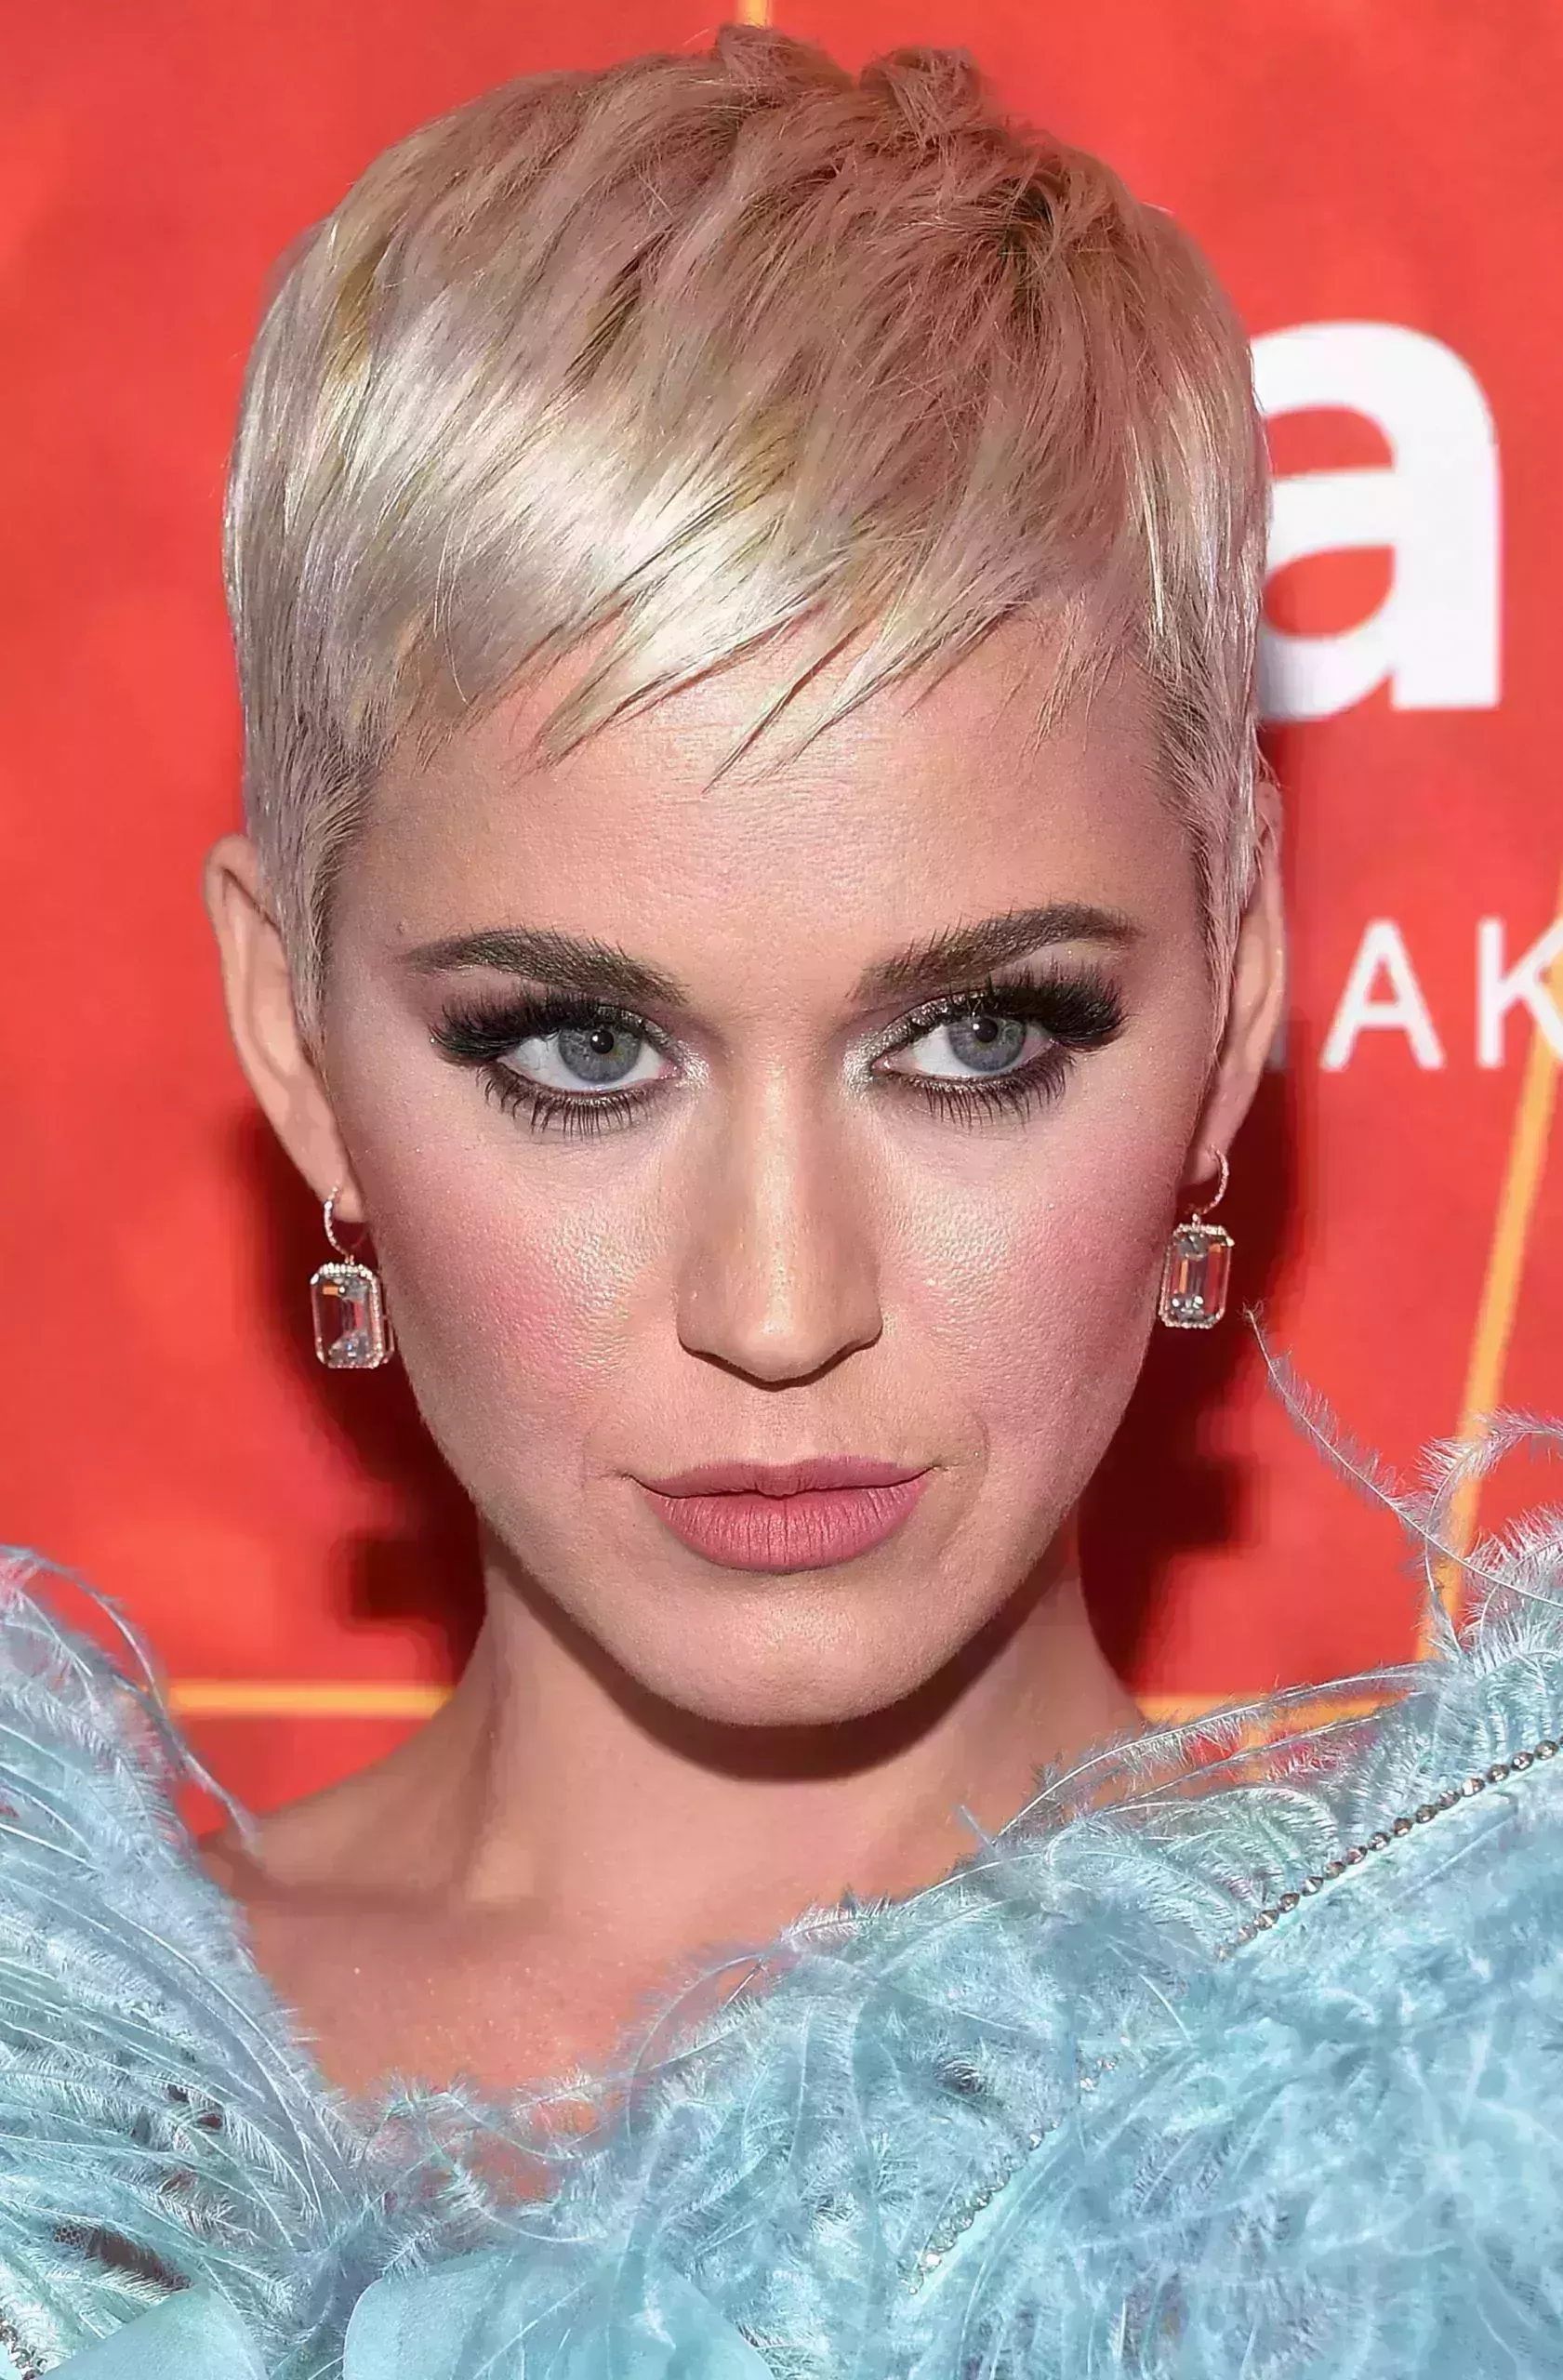 Katy Perry’ Pixie and Spiky Bangs